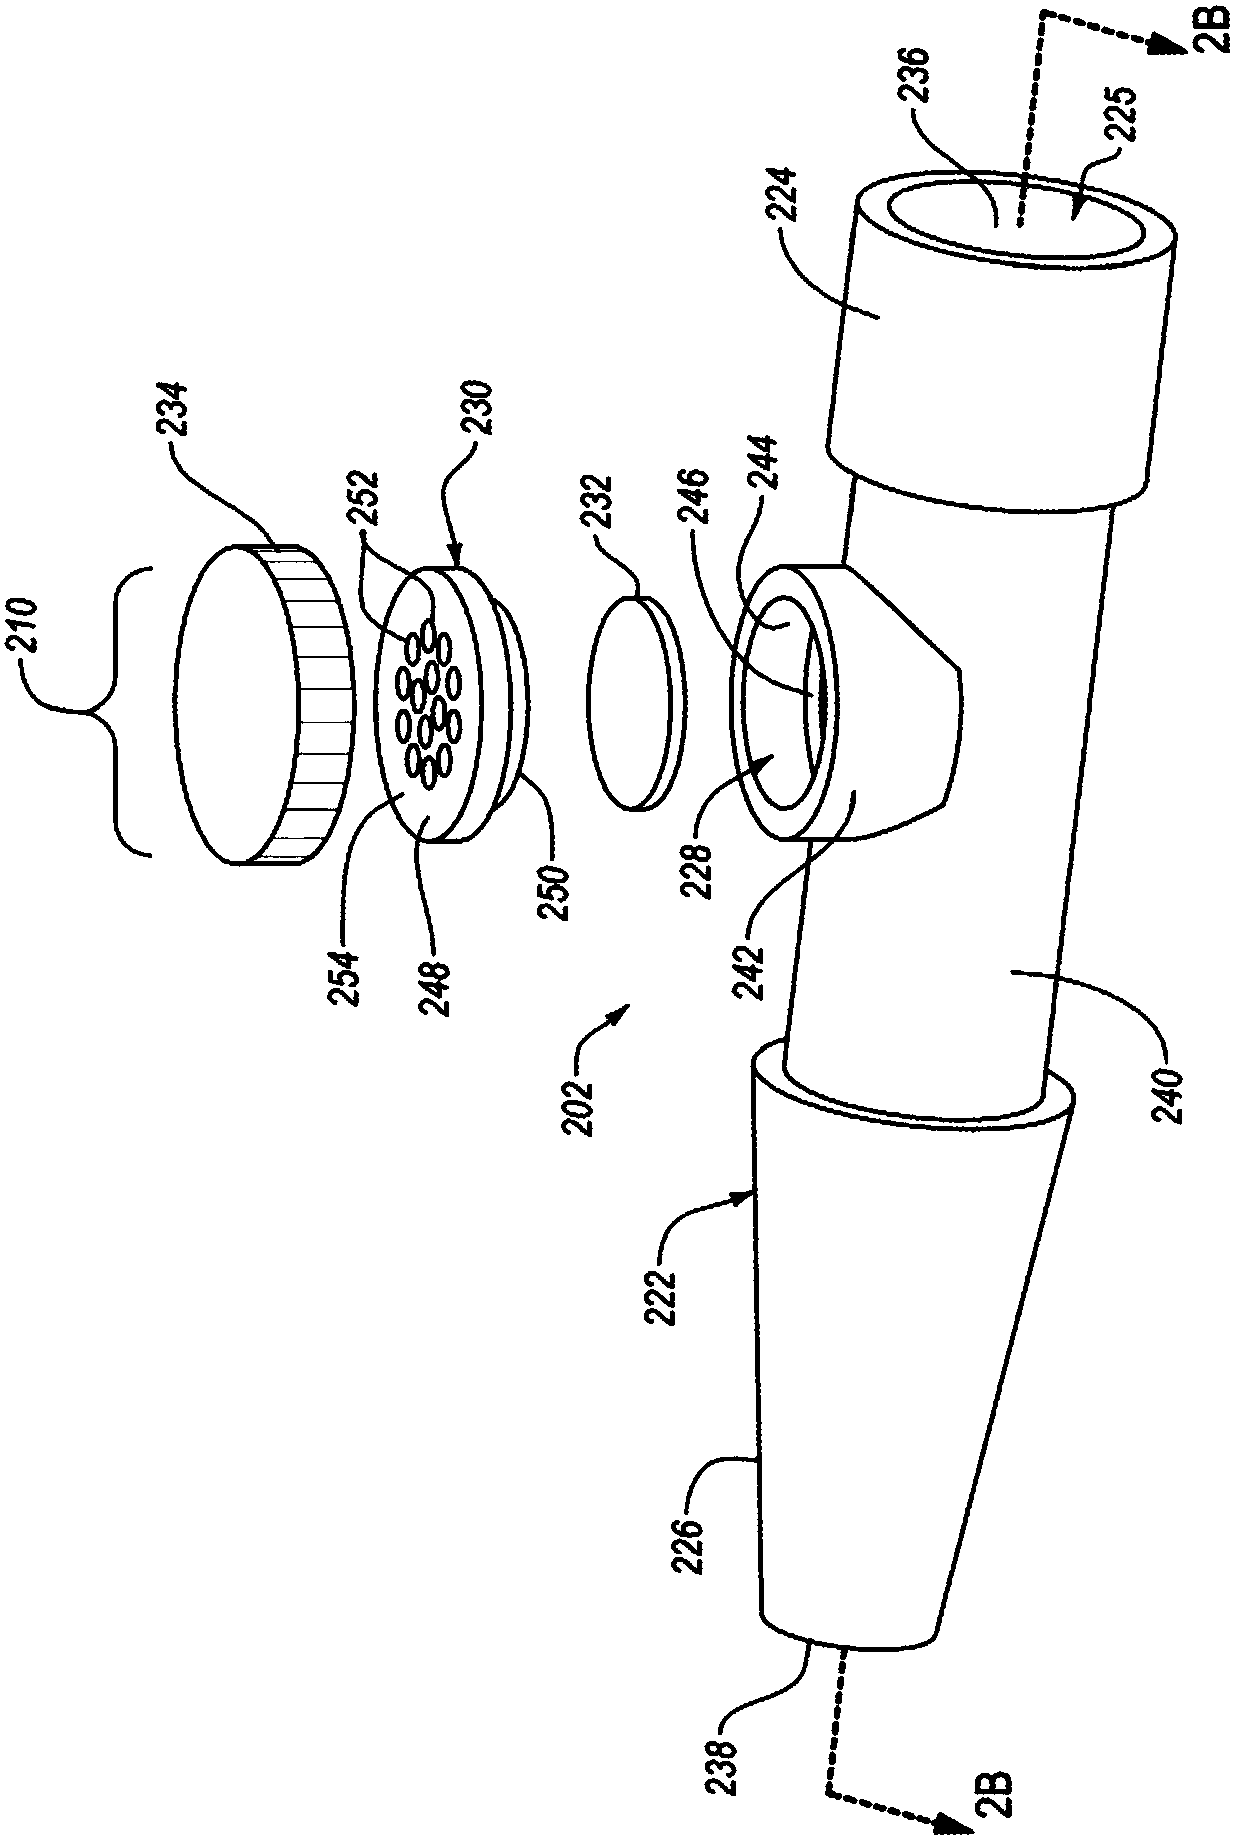 Vent adaptor assemblies, methods of making the same, methods of using the same, and urinary drainage bag systems using the same